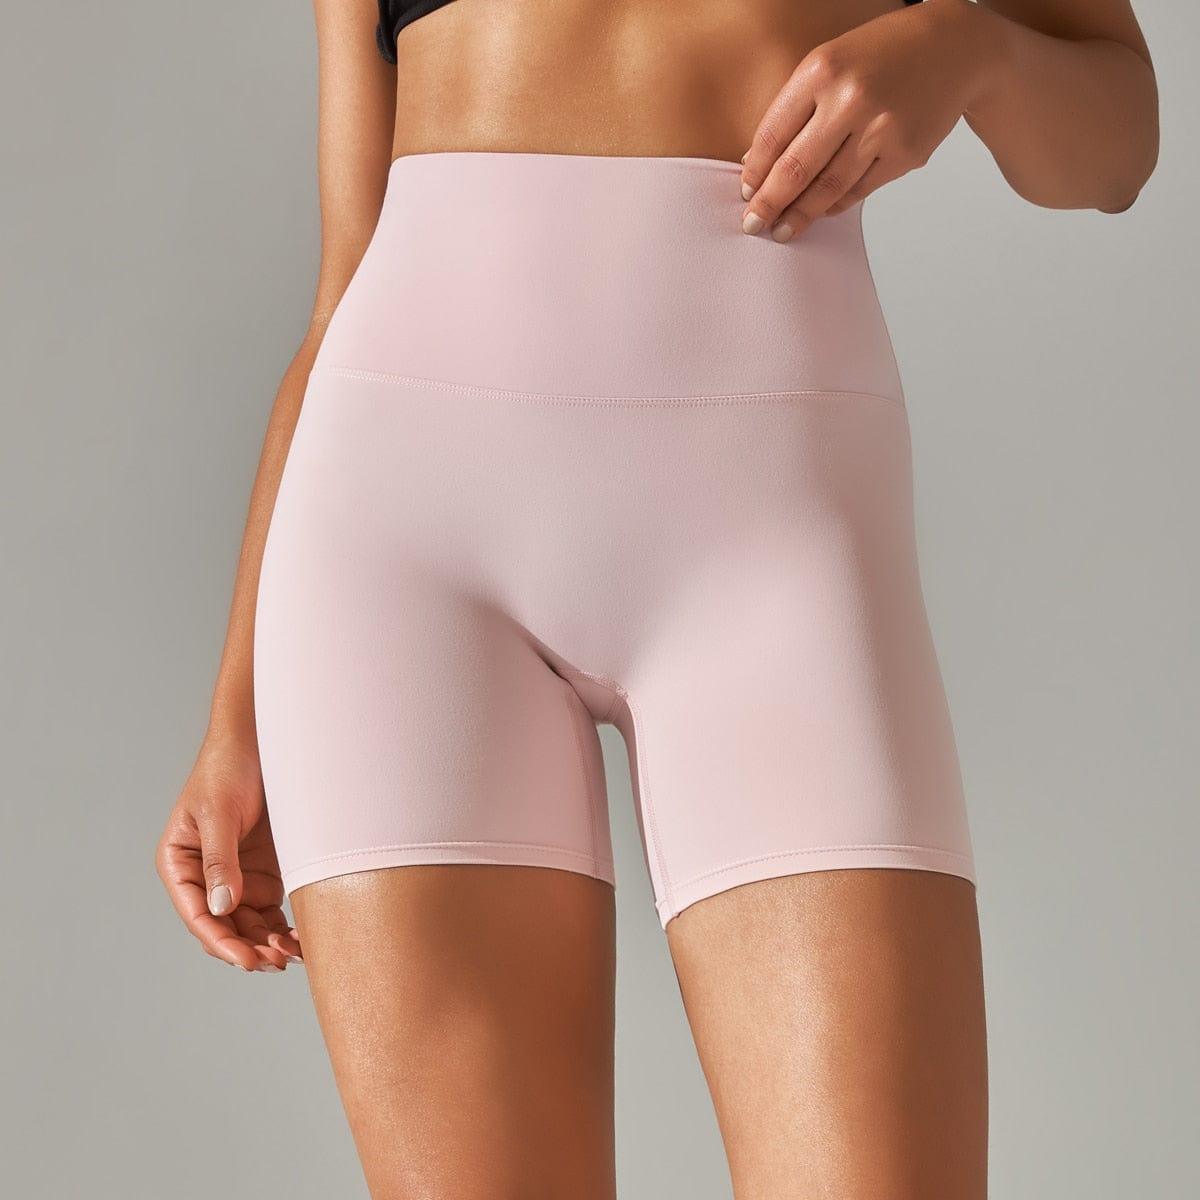 Shop 0 Light Pink / XL Yoga Shorts Women Fitness Shorts Running Cycling Shorts Breathable Sports Leggings High Waist Summer Workout Gym Shorts Mademoiselle Home Decor